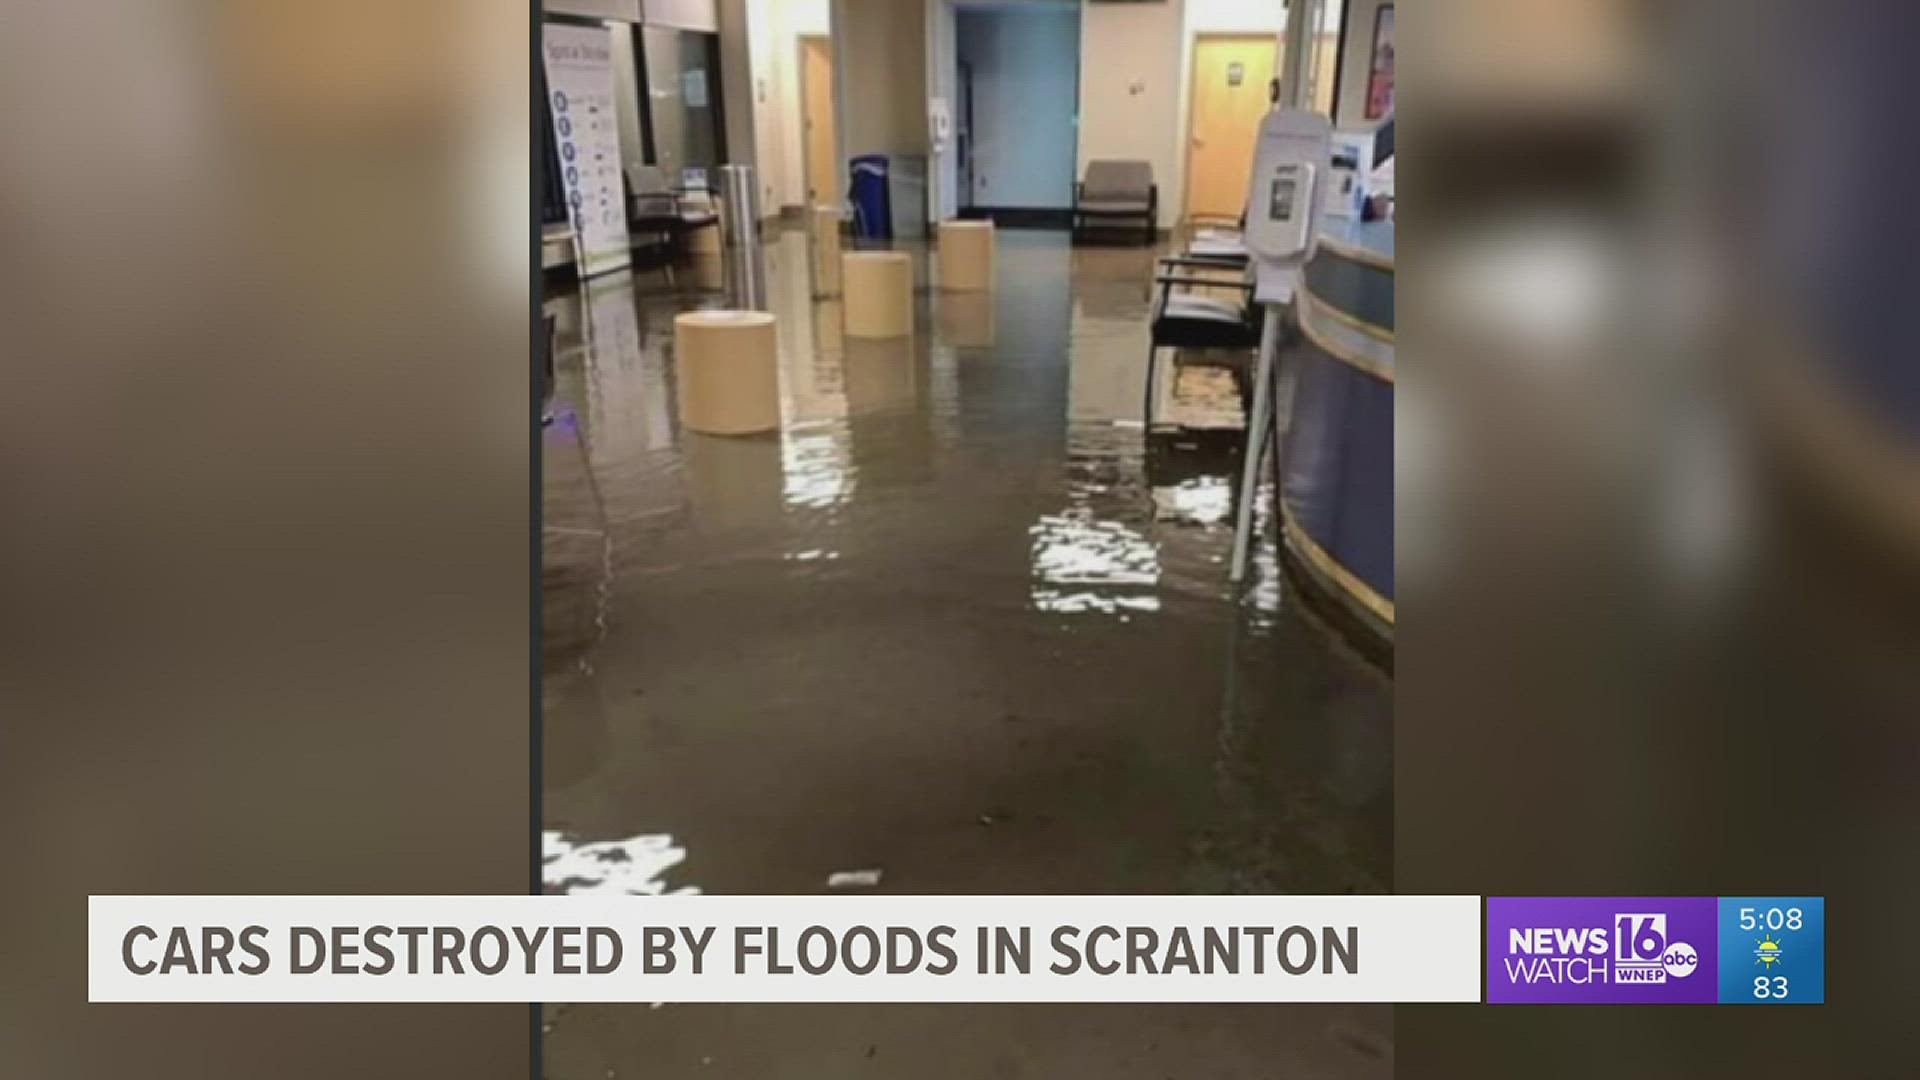 First responders in Scranton had a busy night with dozens of calls for flooded basements and floating cars. Some were prepared for the heavy rain; others were not.